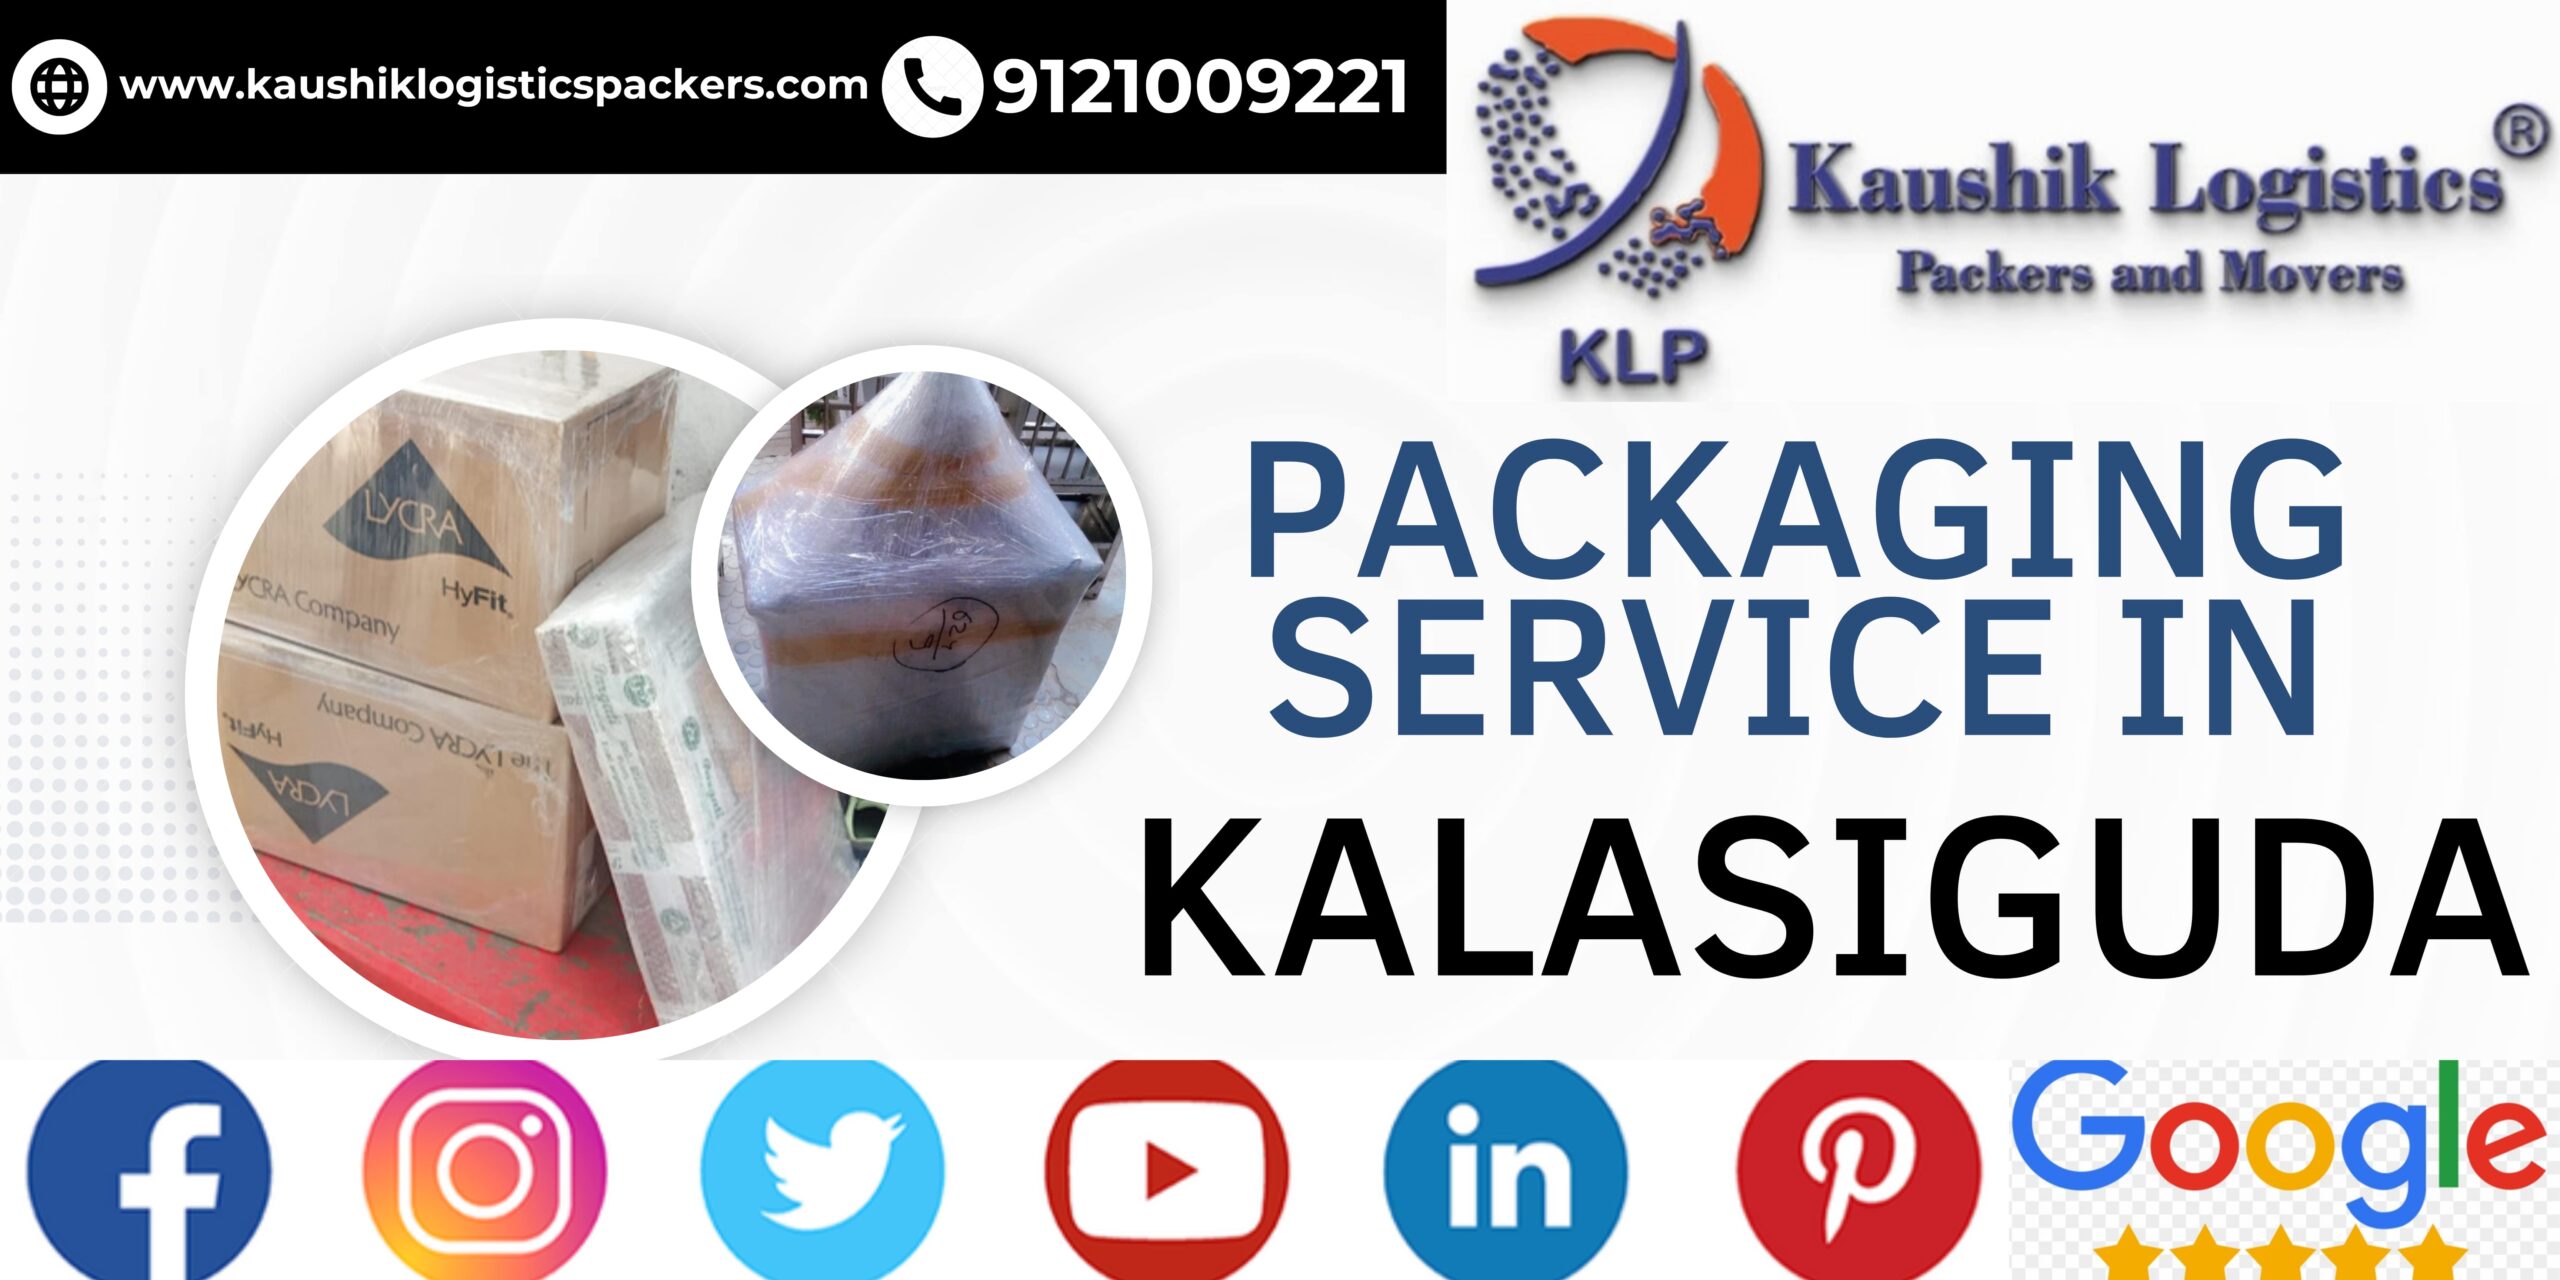 Packers and Movers In Kalasiguda